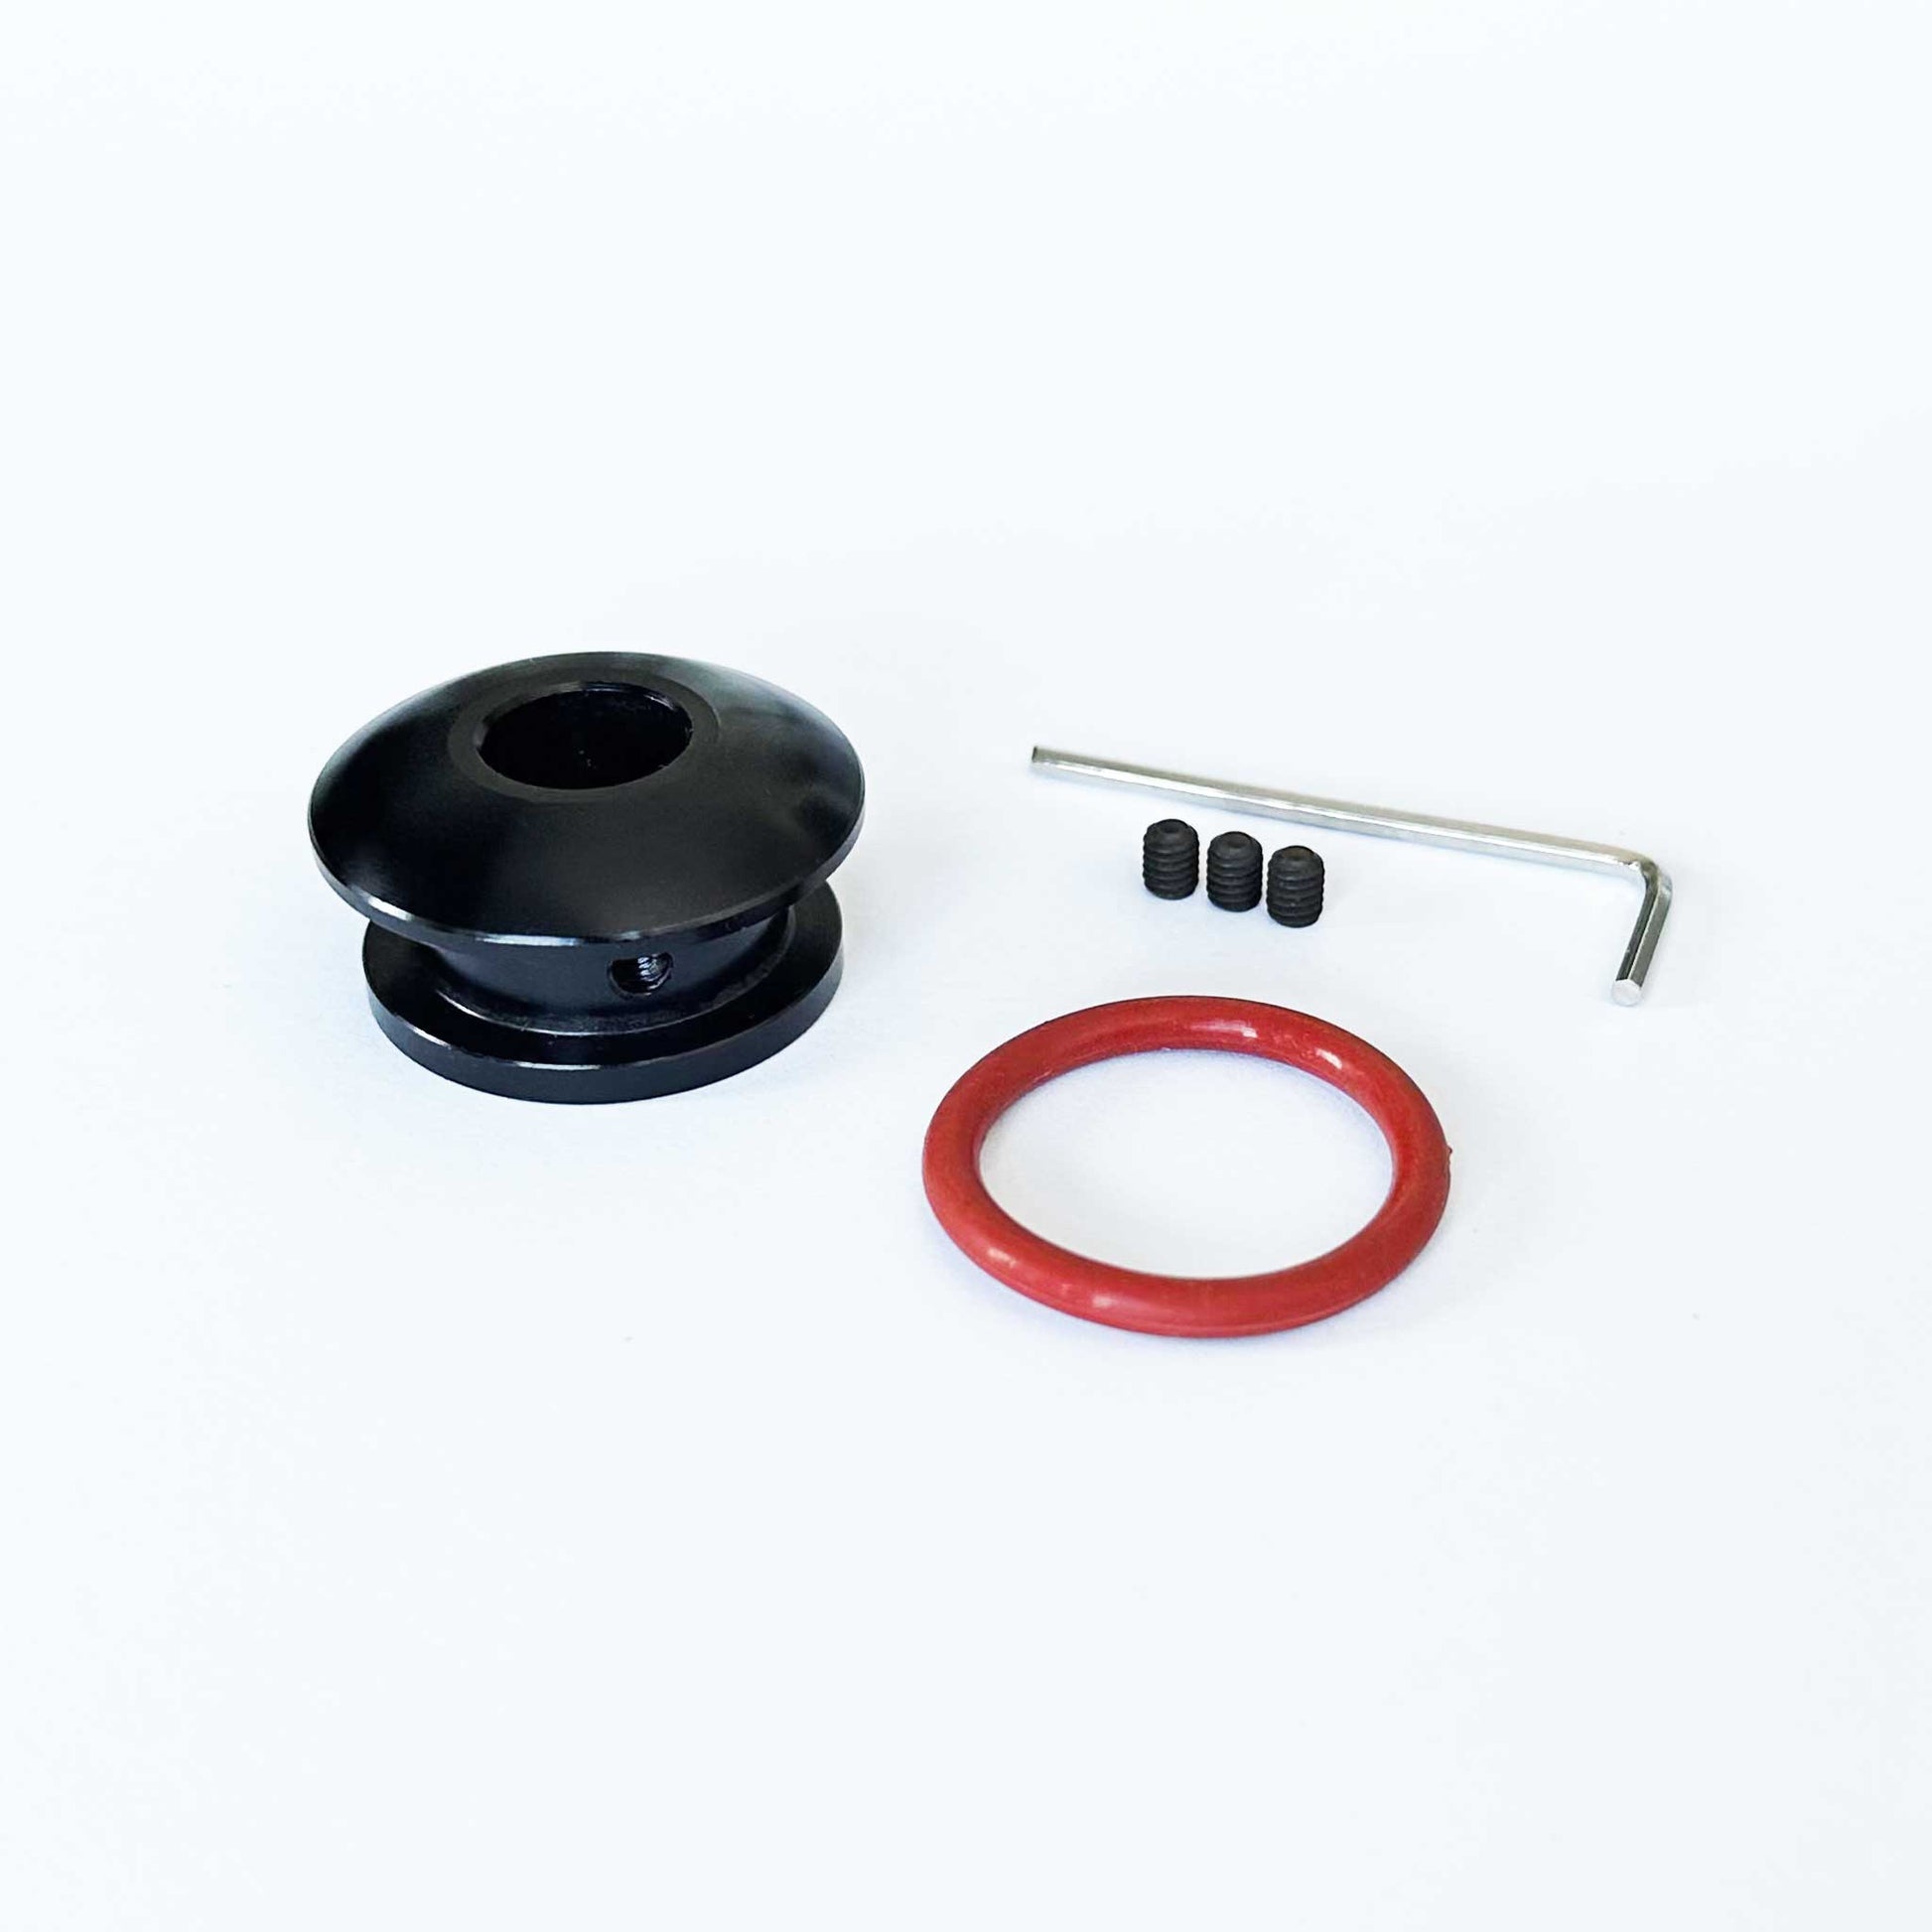 A black non-threaded boot retainer is standing upright on a white background with installation tools beside it